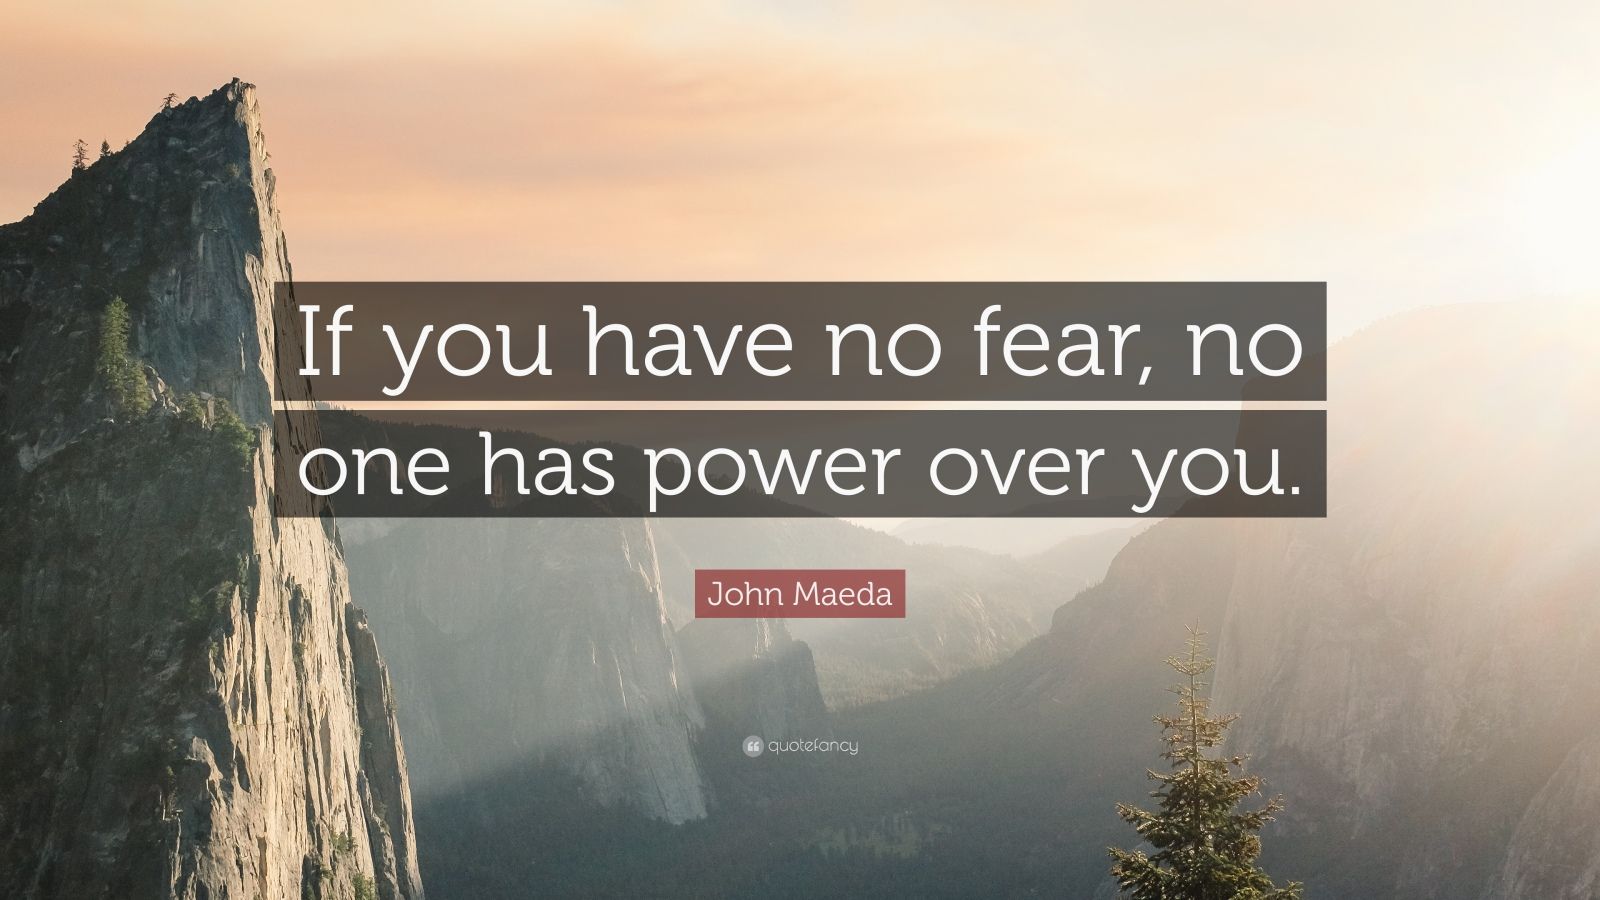 John Maeda Quote “If you have no fear, no one has power over you.” (7